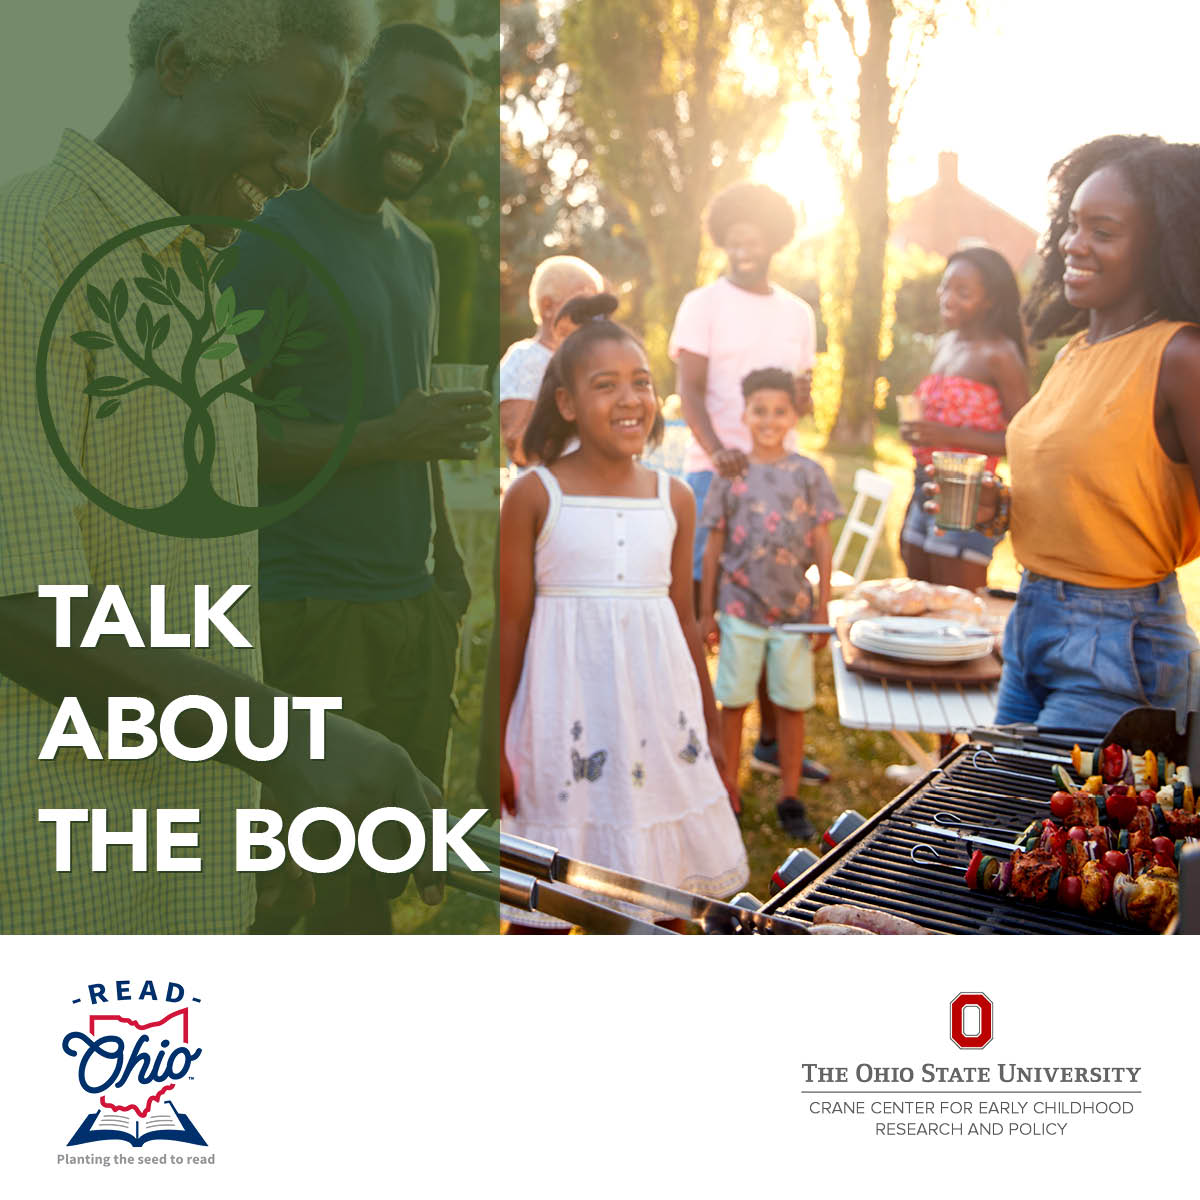 We’re back with more ideas on talking about books with your child!

Read about things you’ll do together. “This book is about a family cookout. We’ll go to a cookout next week.” 🍔

Ask questions and let your child ask questions. #ReadTogetherGrowTogether   @OHEducation